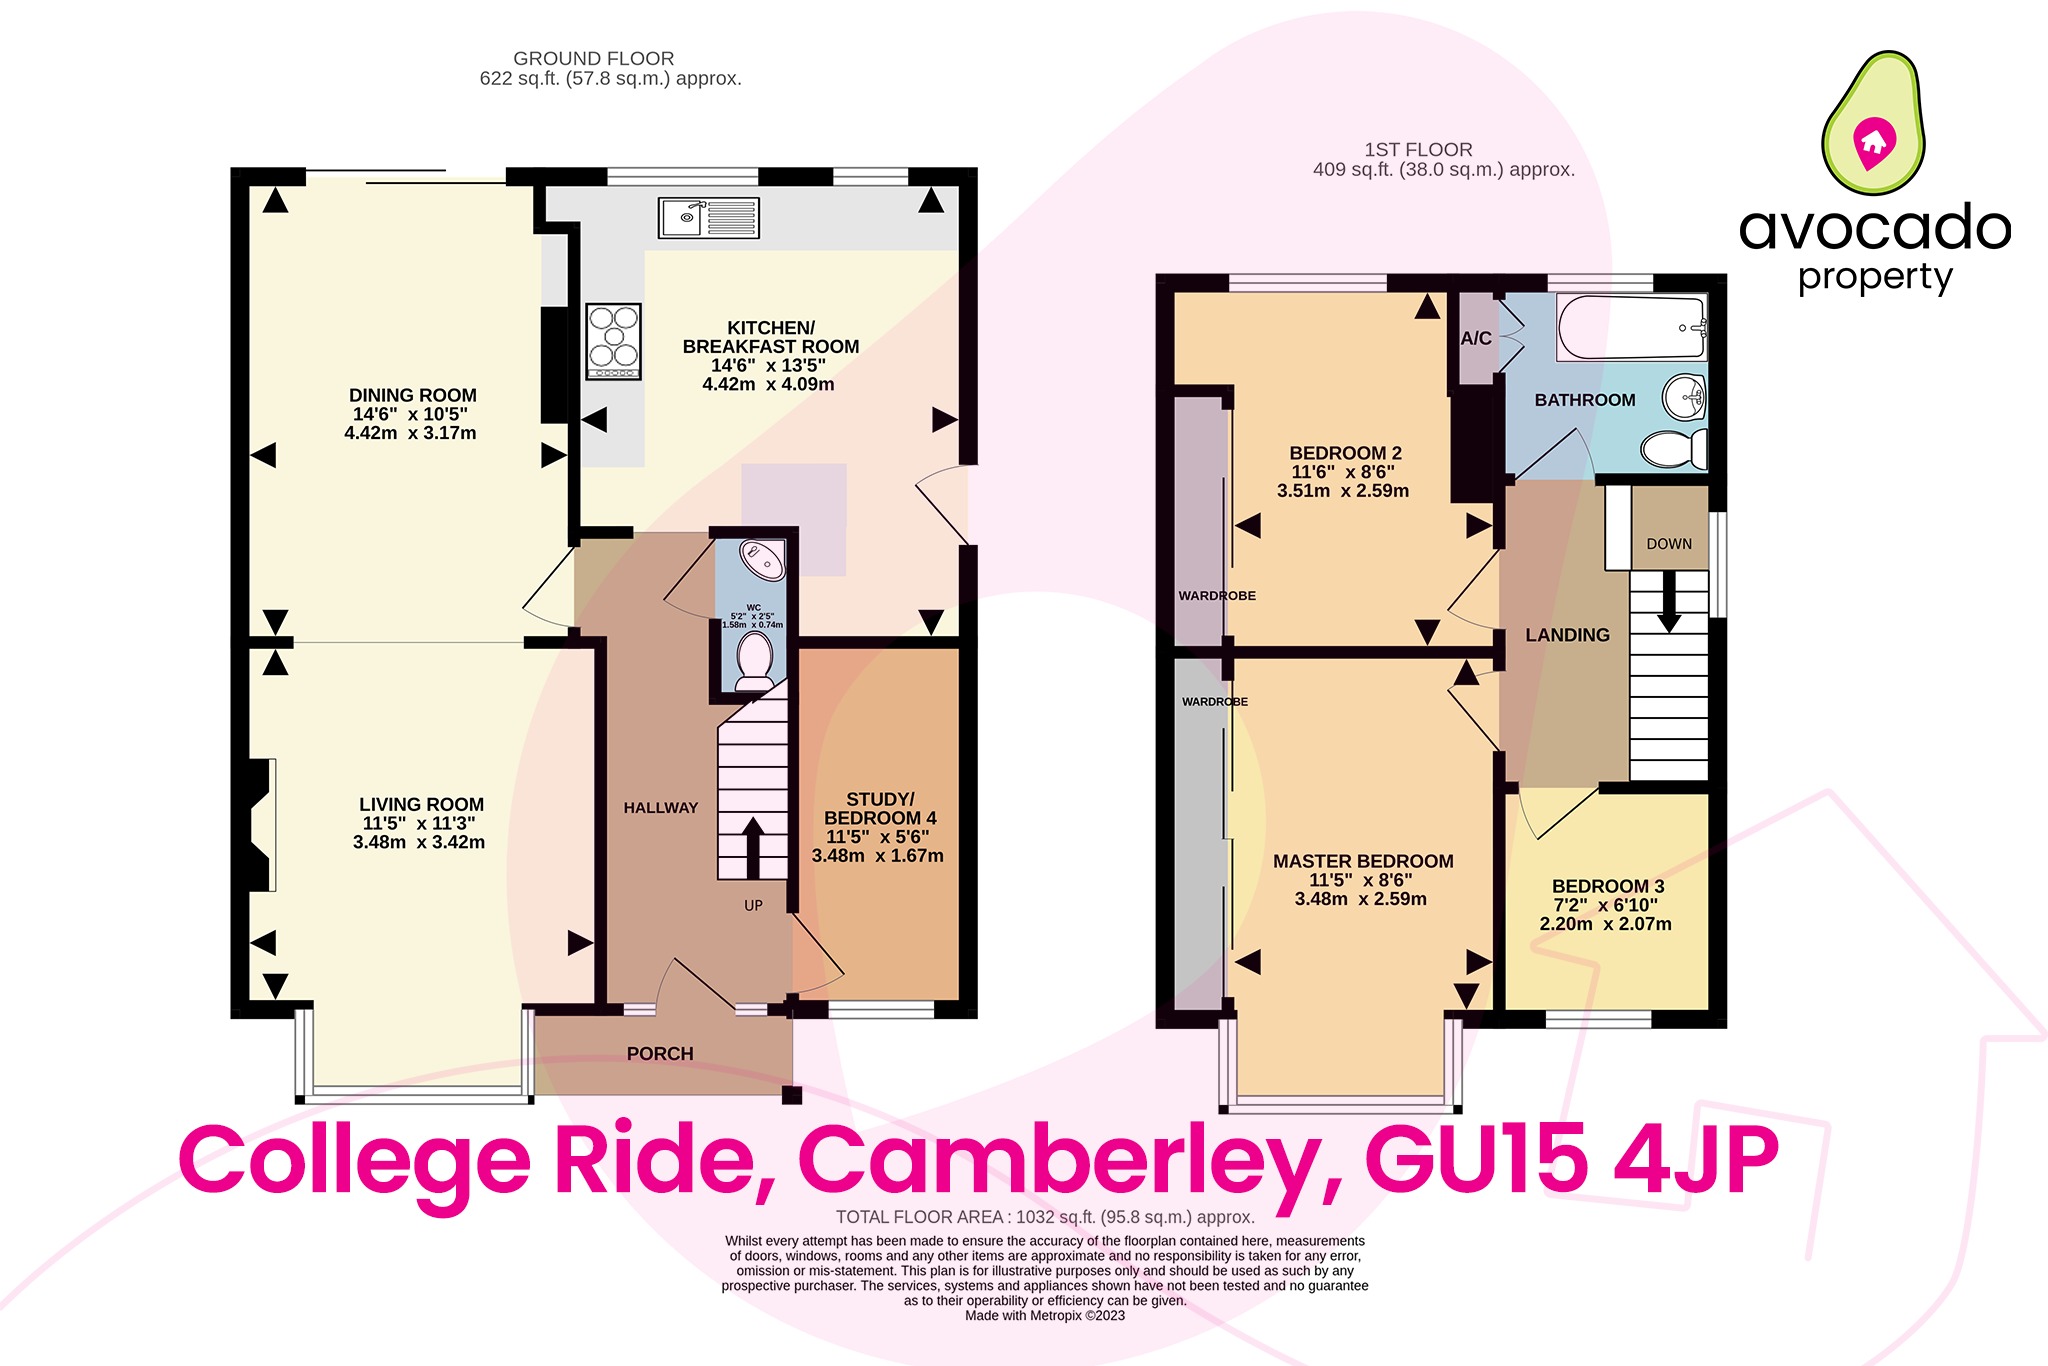 3 bed detached house to rent in College Ride, Camberley - Property floorplan